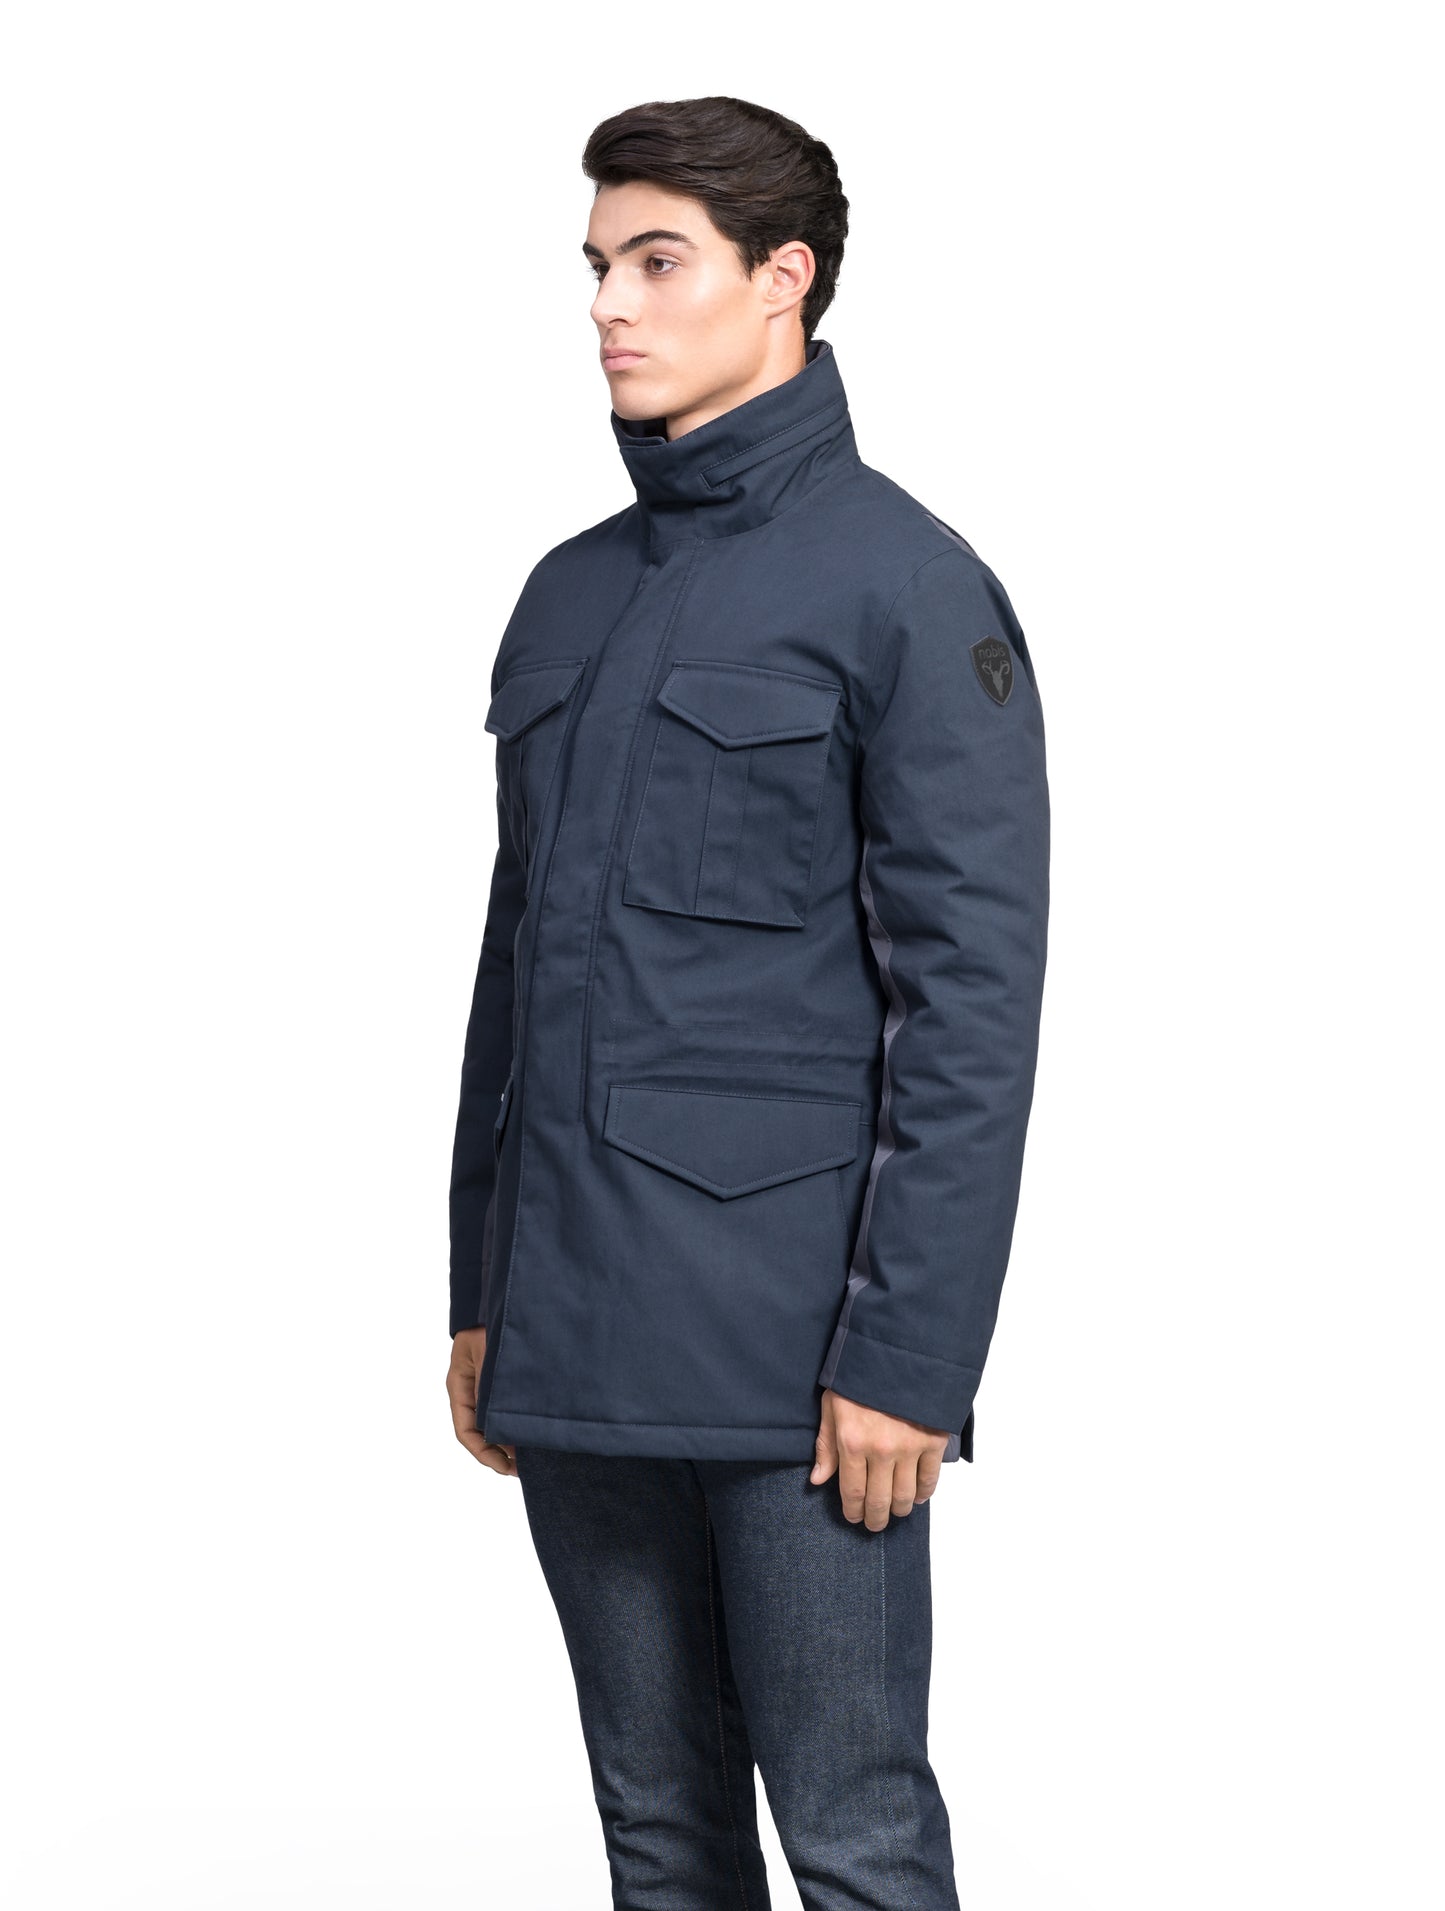 Pelican Men's Tailored Field Jacket in hip length, premium cotton blend and 3-ply micro denier fabrication, Premium Canadian origin White Duck Down insulation, tuck away, waterproof hood in premium cire technical nylon taffeta, two-way centre-front zipper with magnetic wind flap, pit zipper vents, magnetic closure chest and waist flap pockets, hidden adjustable waist drawcord, and action back detailing, in Navy